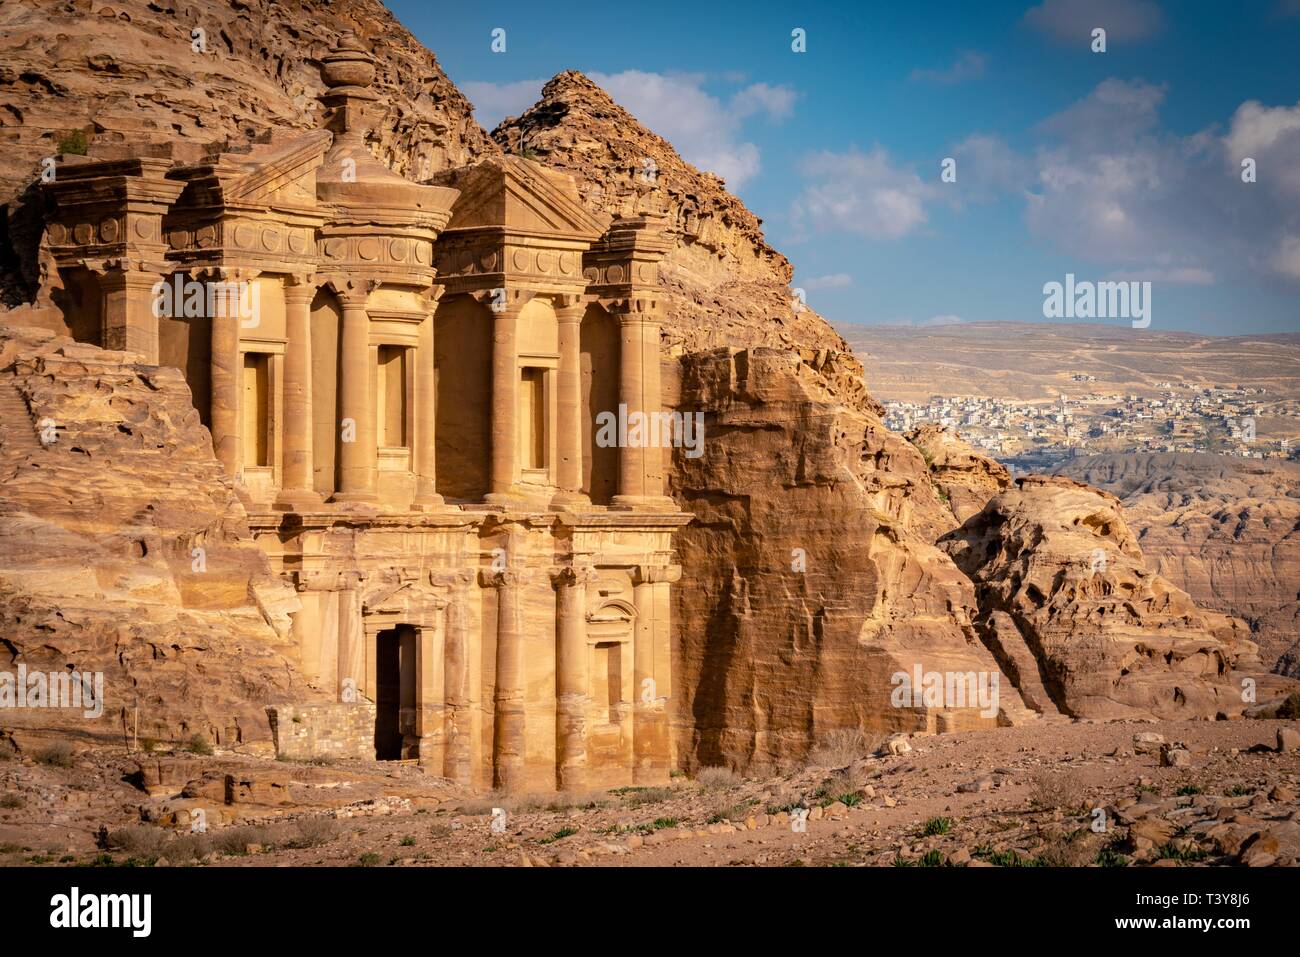 Ad Deir ('The Monastery'; Arabic: الدير ), also known as El Deir, is a monumental building carved out of rock in the ancient Jordanian city of Petra. Stock Photo